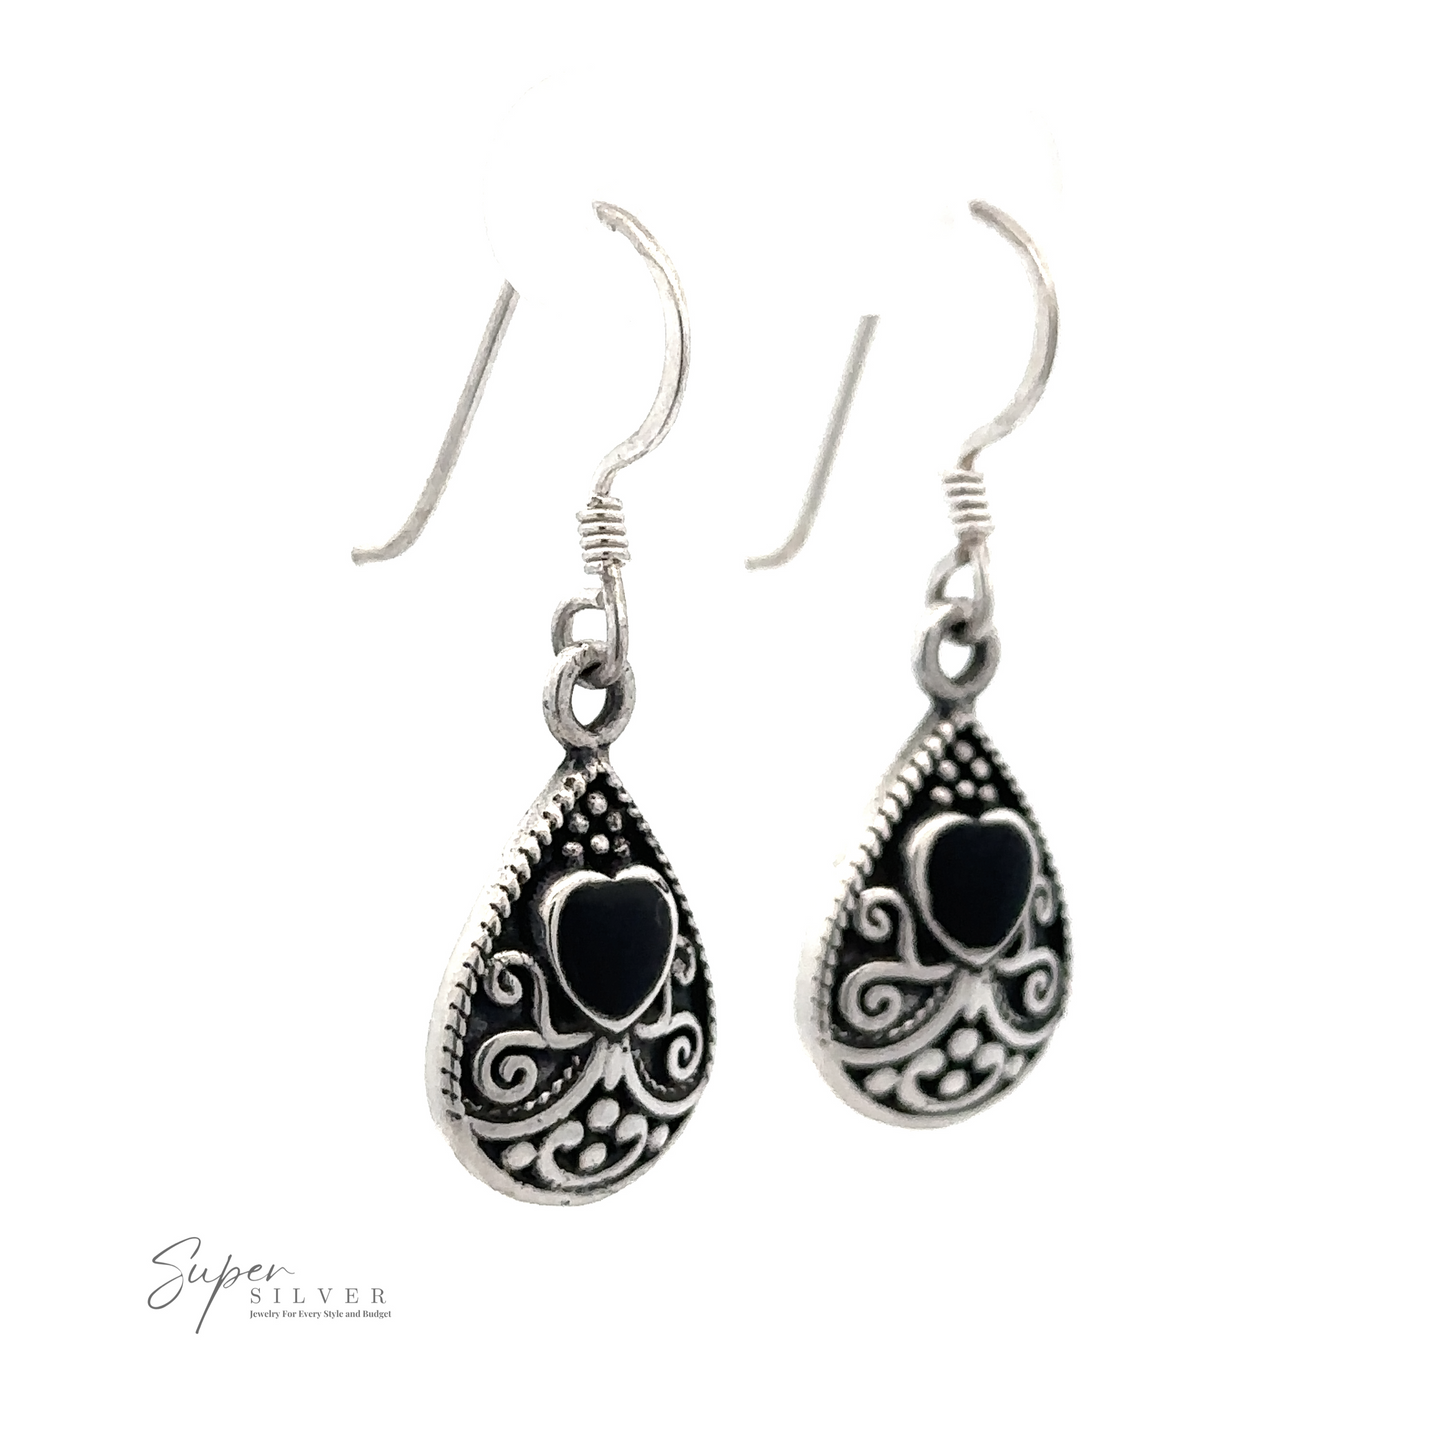 
                  
                    A pair of Bali Style Teardrop Earrings with Inlaid Stone hangs from hook wires. The background is plain white. The inscription "Super Silver" is visible in the corner, enhancing the elegance of these earrings.
                  
                